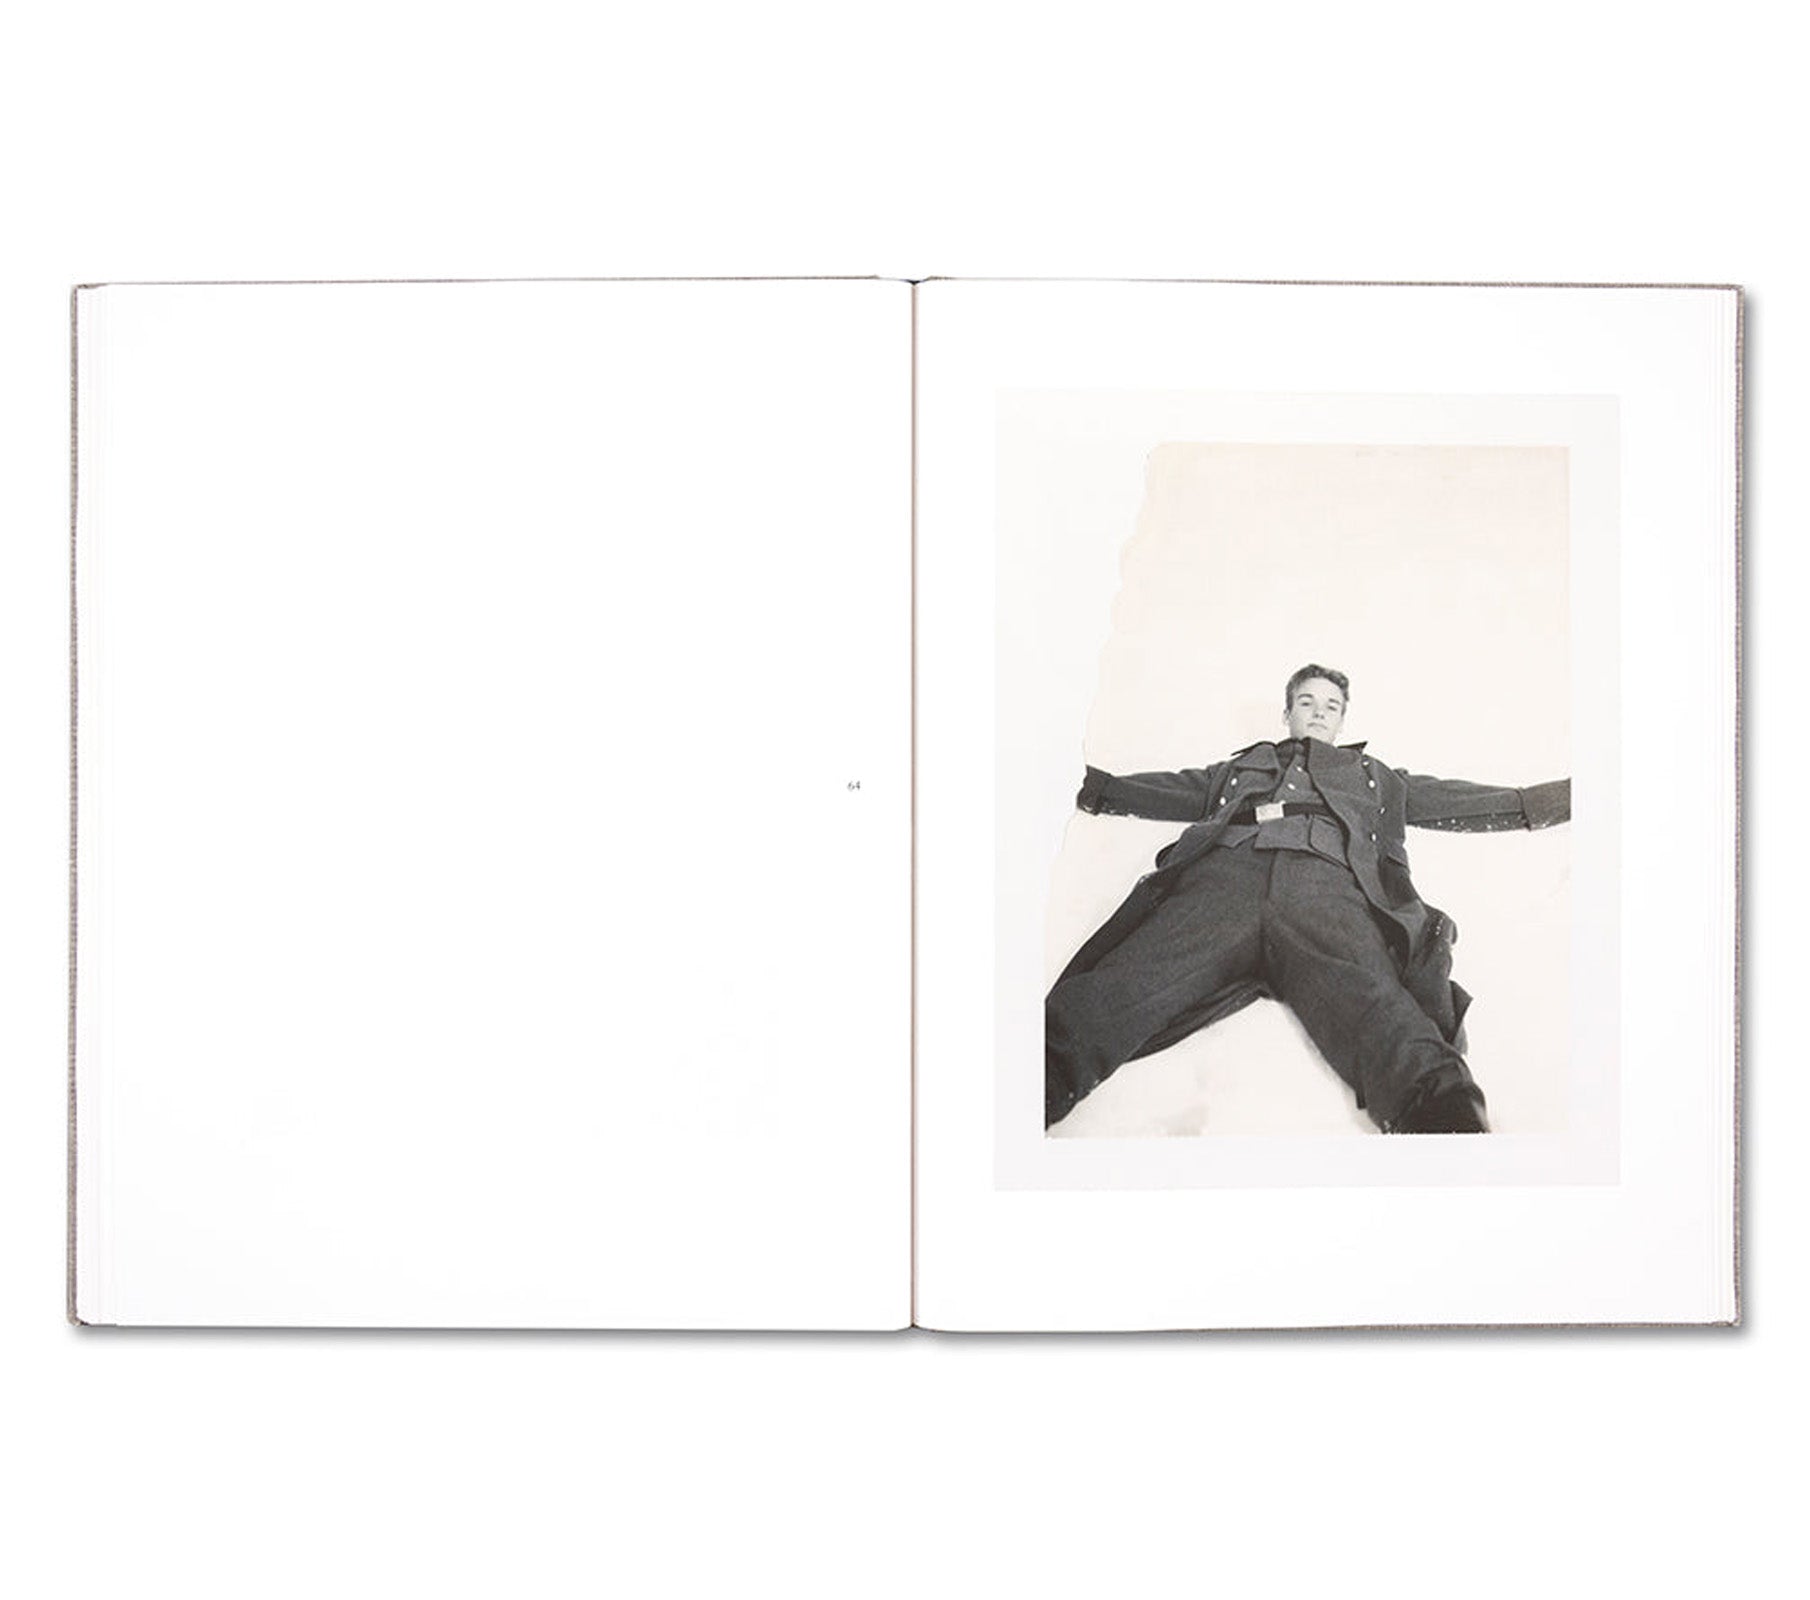 AUGUST by Collier Schorr [SIGNED]